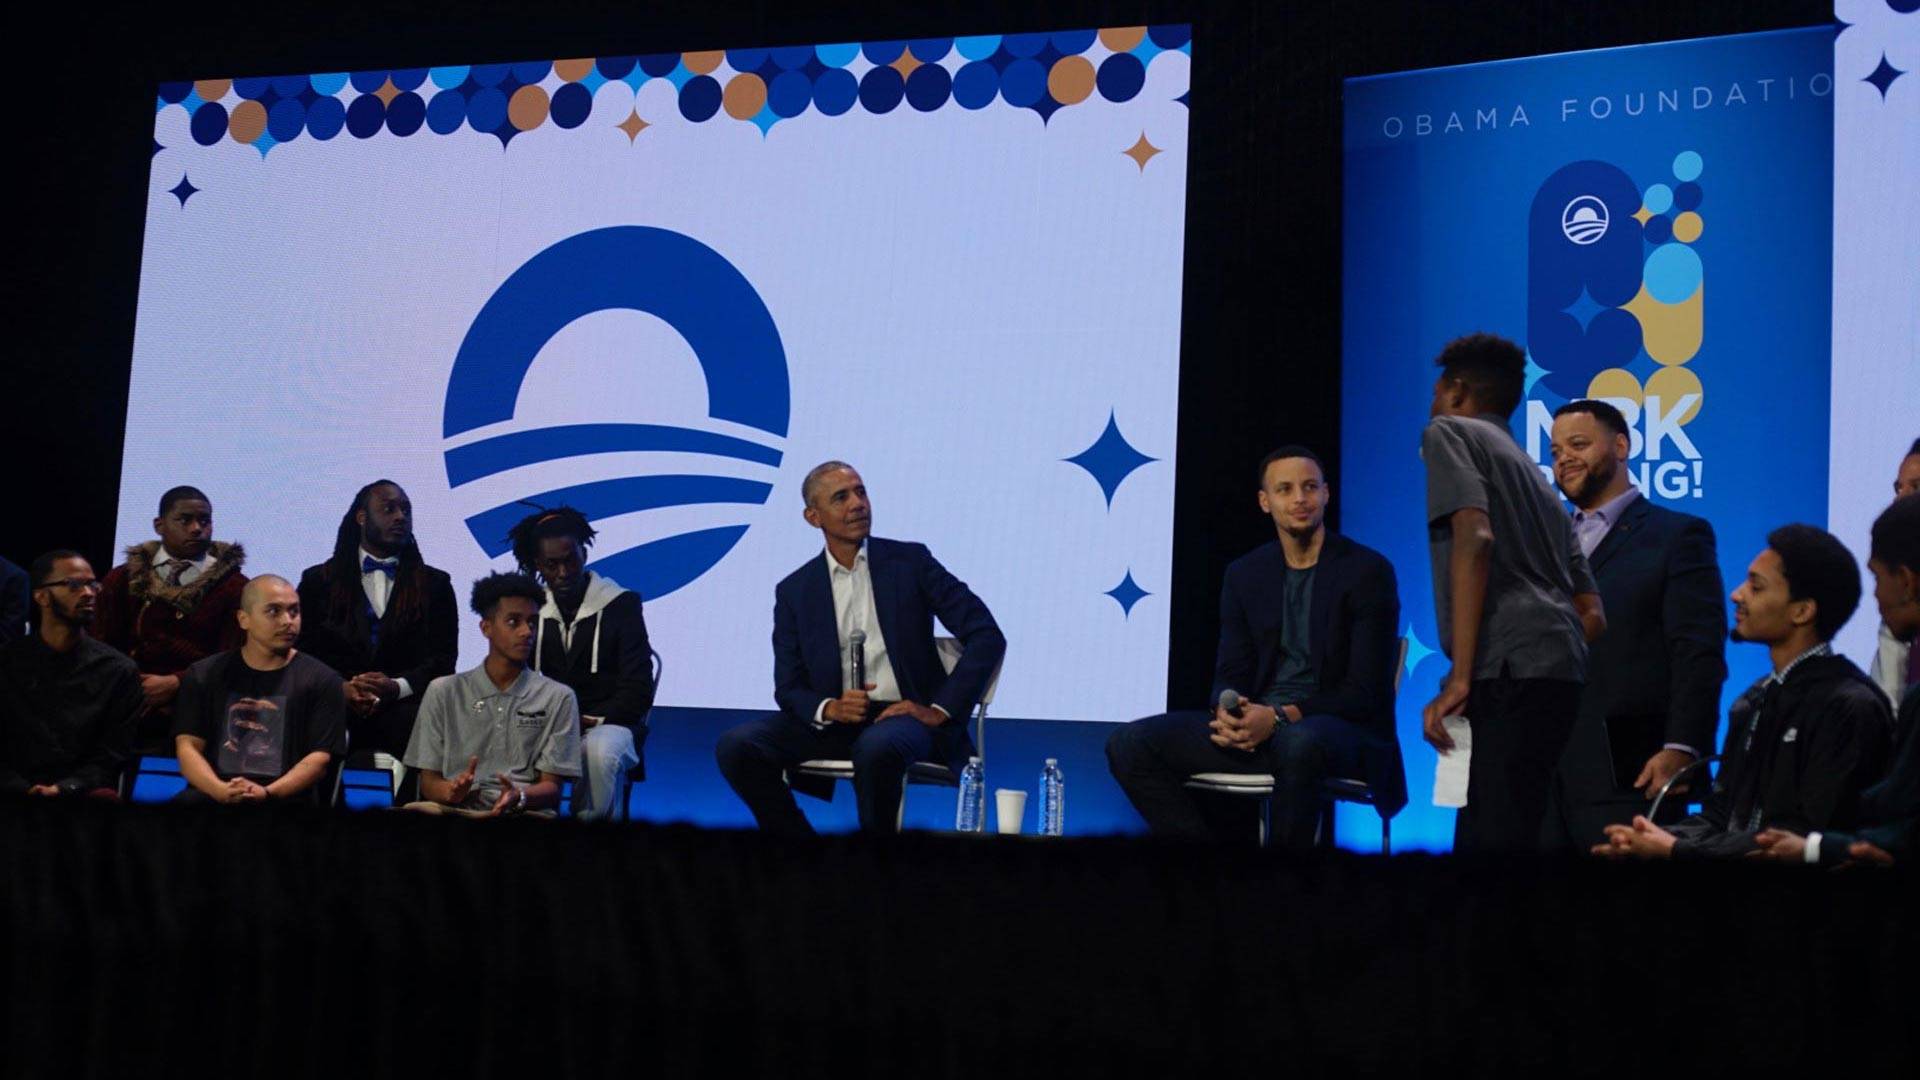 Former president Barack Obama and the Warriors' Stephen Curry at the My Brither's Keeper conference in Oakland, Feb. 19, 2019. Pendarvis Harshaw/KQED